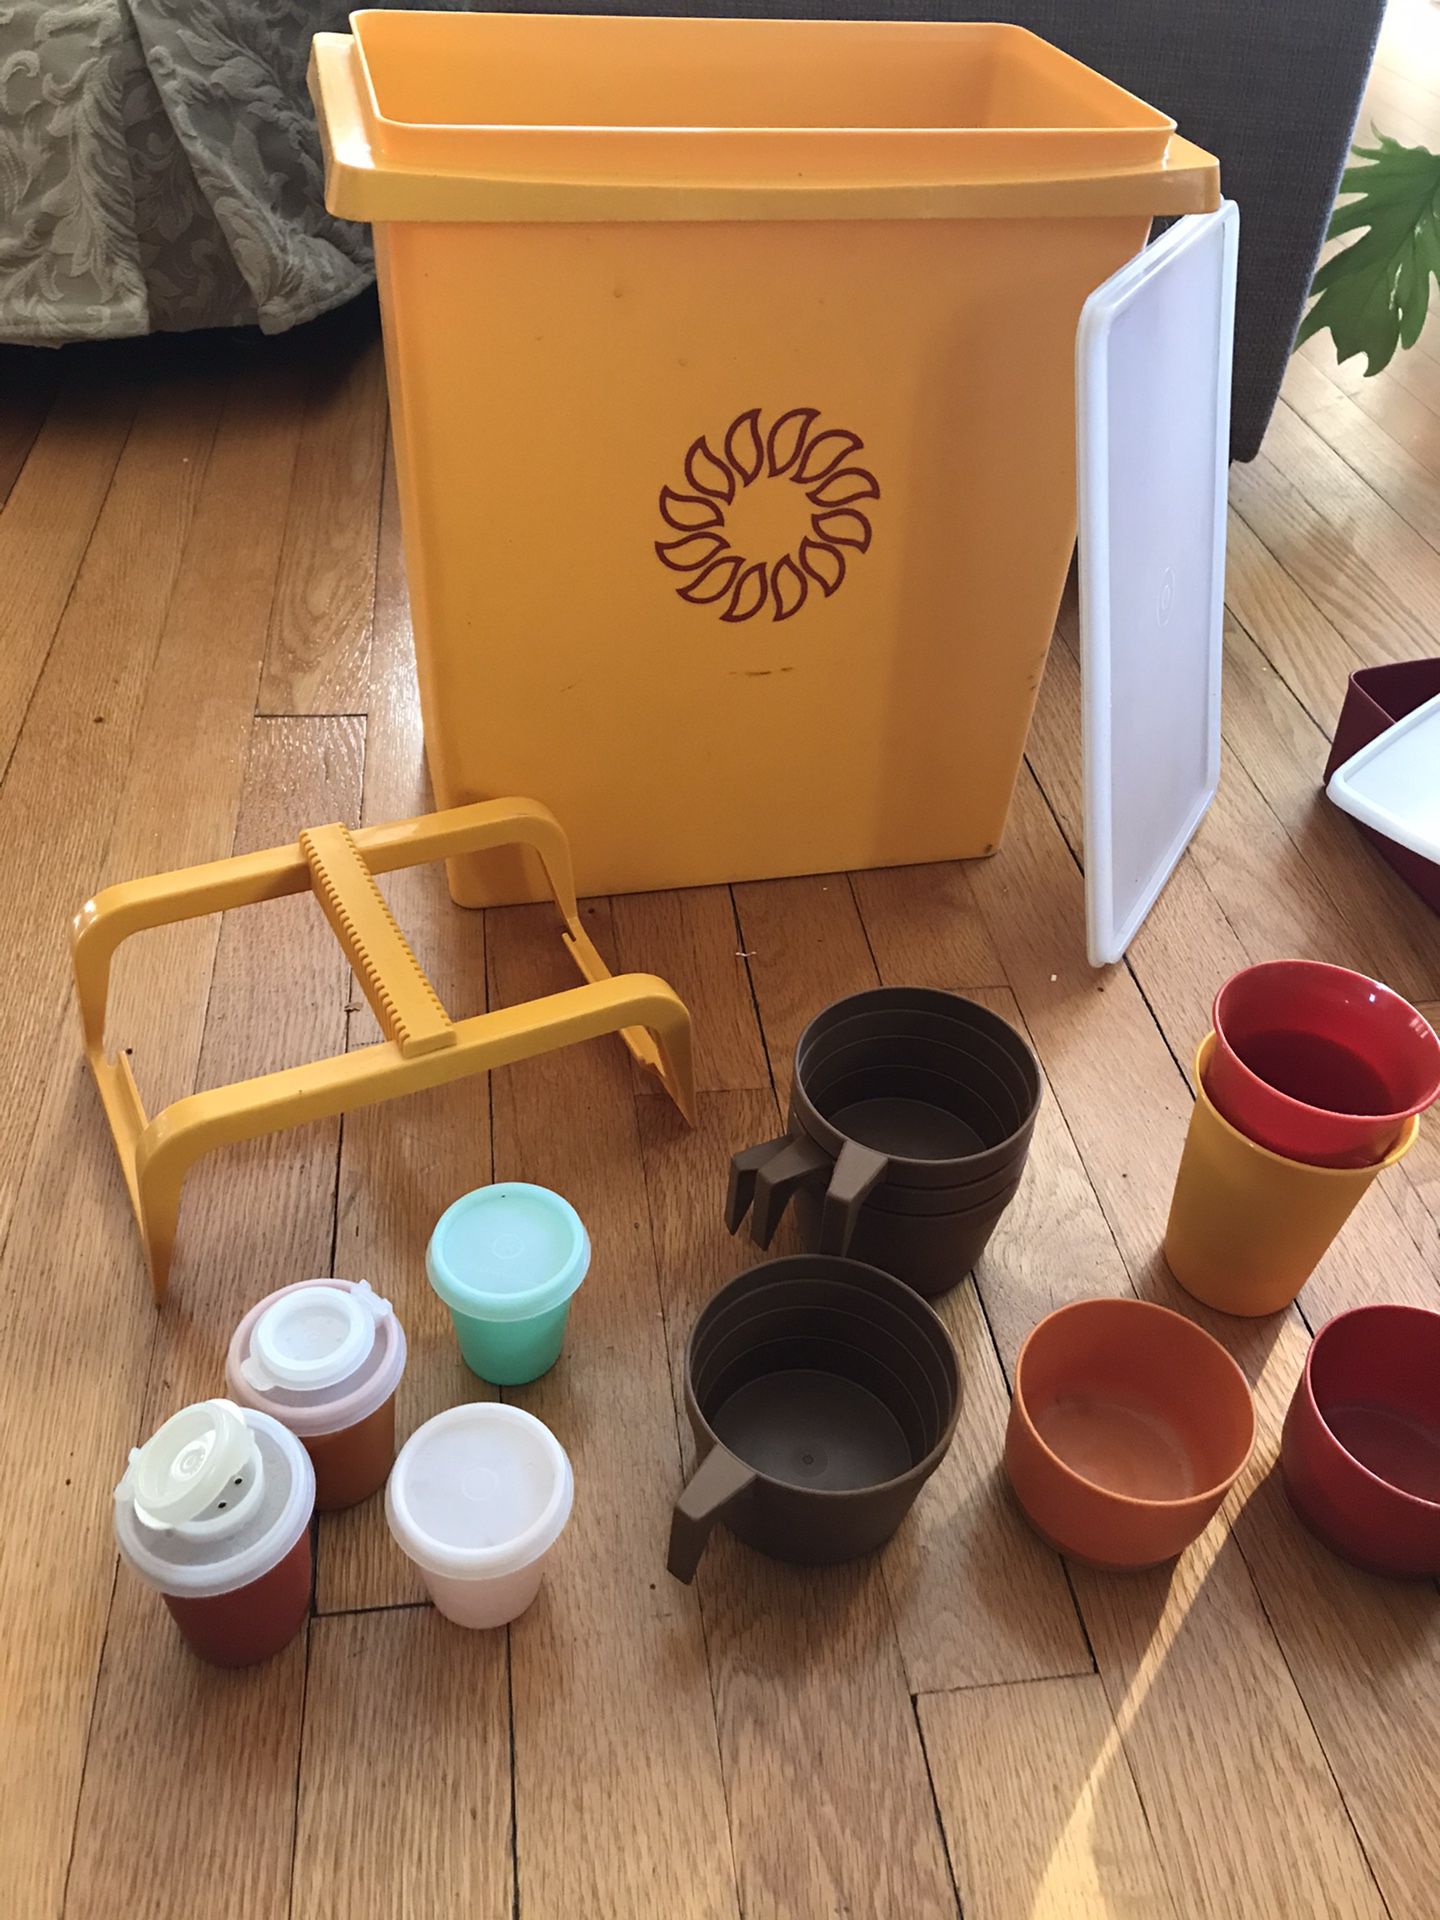 Vintage Tupperware Canister Set Red Tulip Rare for Sale in Chatham, NY -  OfferUp